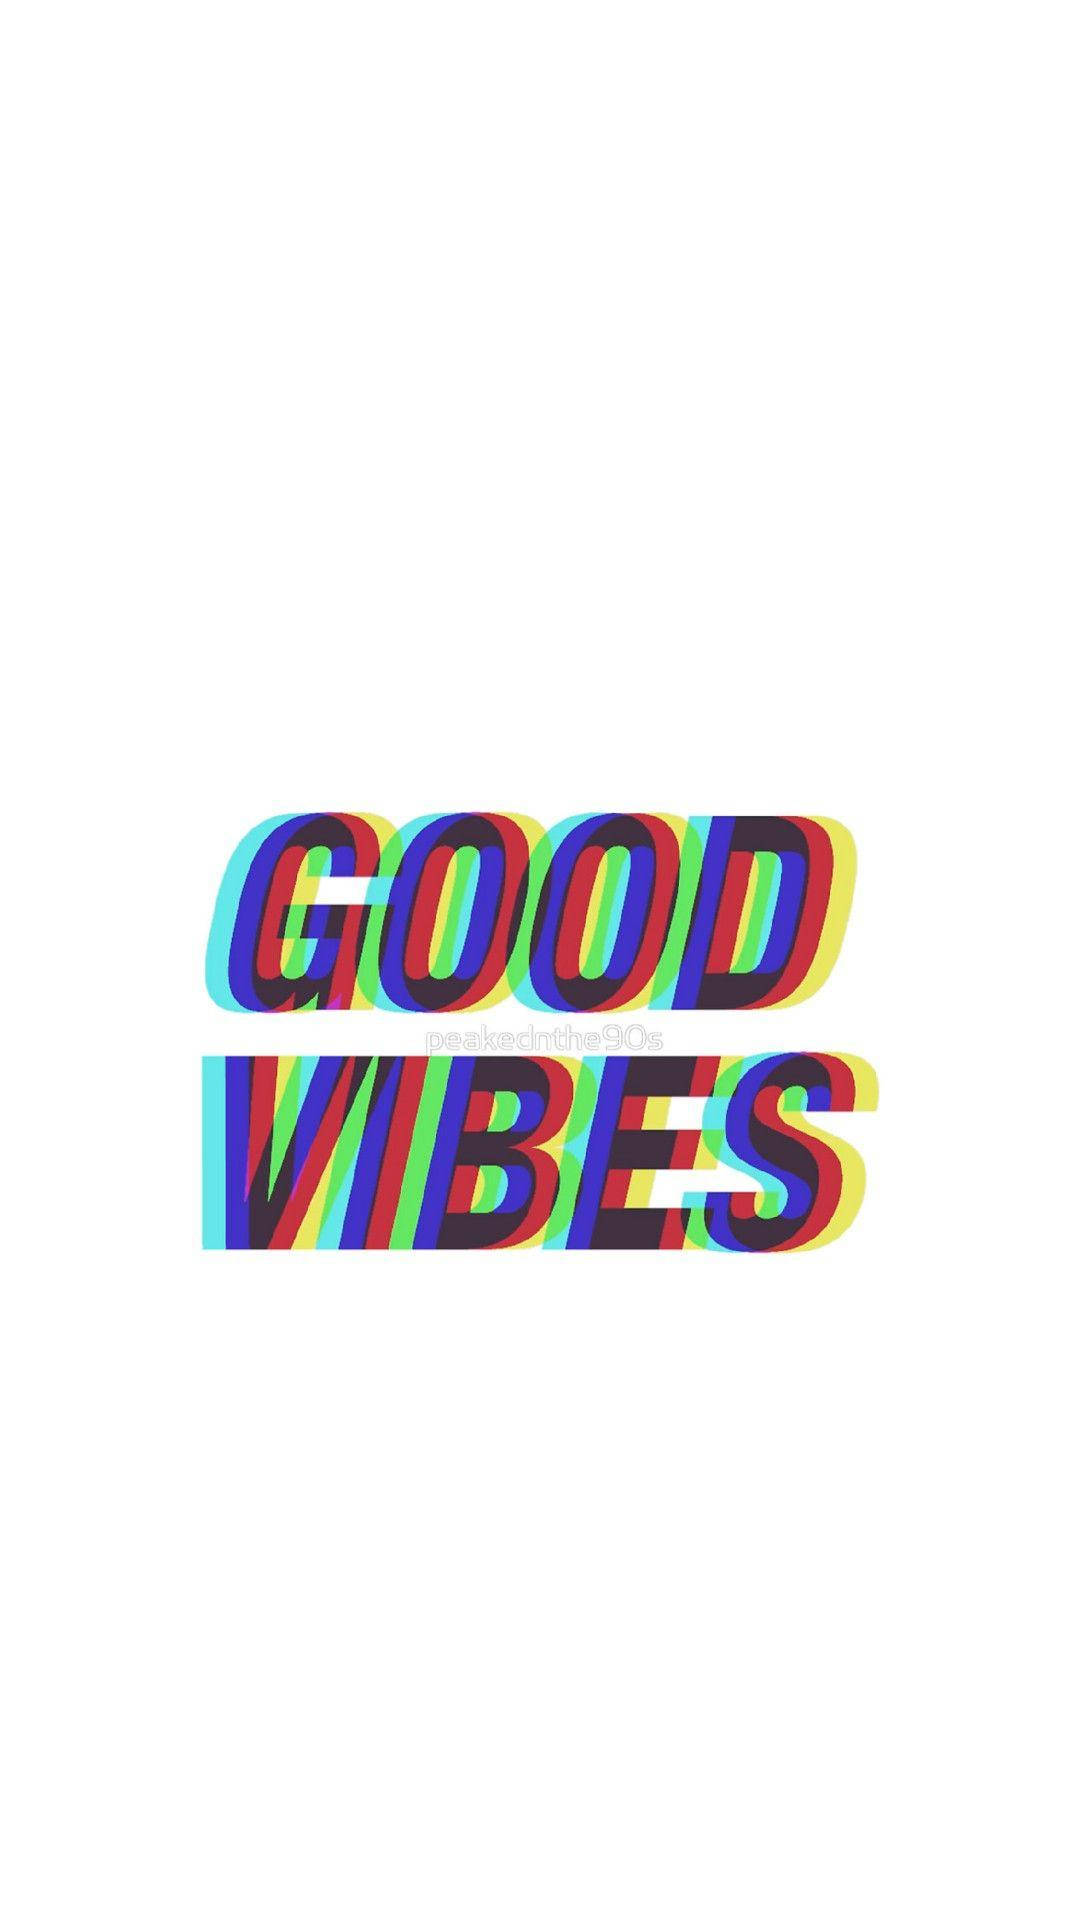 Good Vibes Logo On A White Background Wallpaper